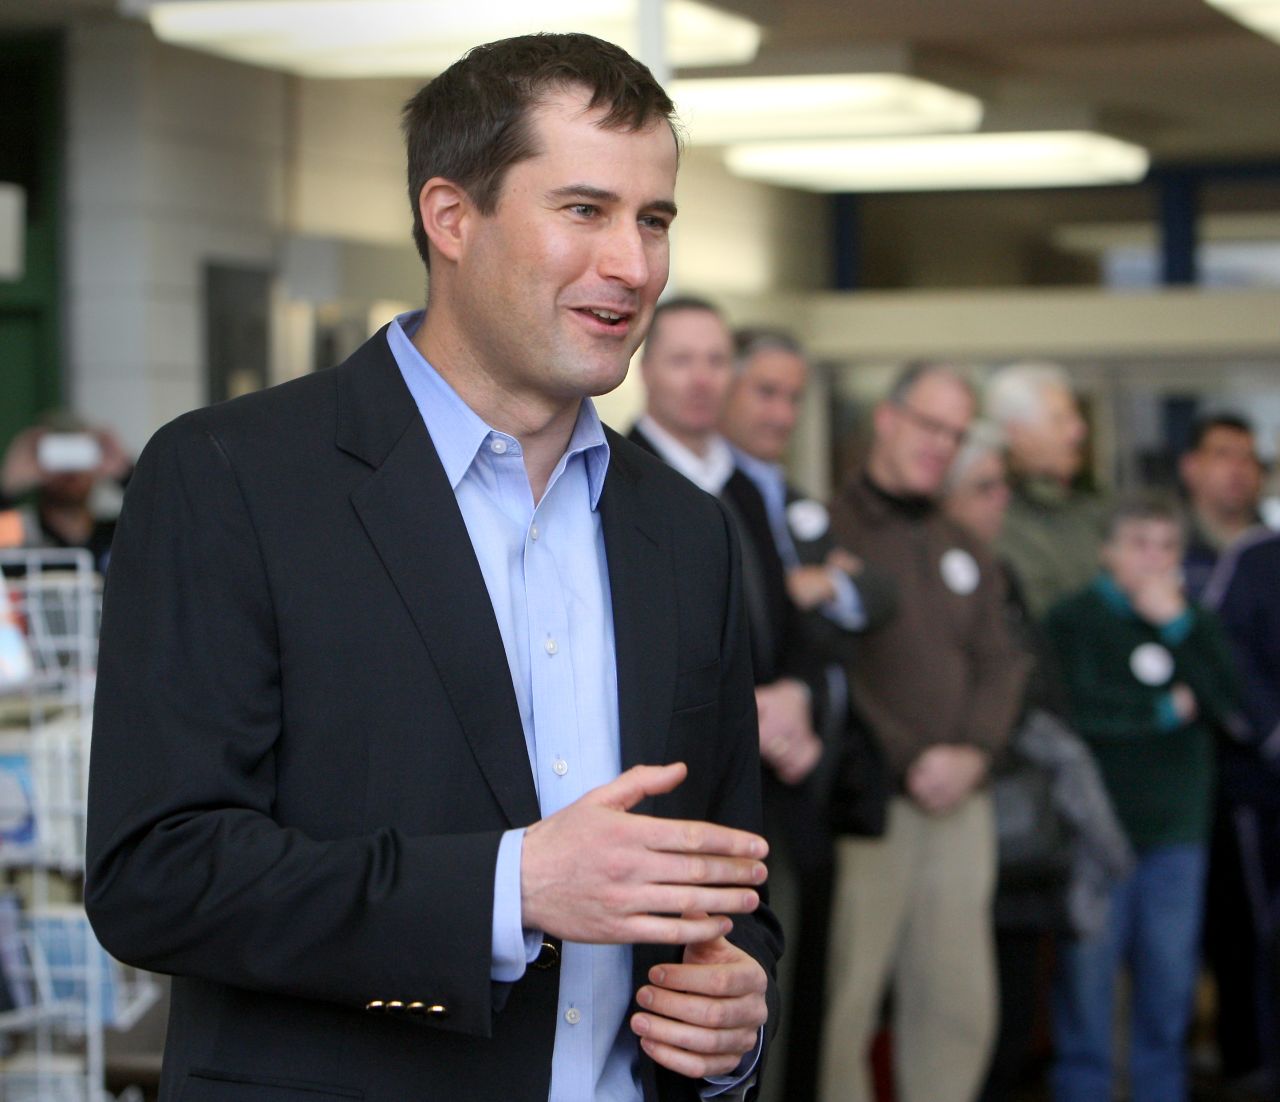 Moulton speaks at a Democratic caucus in Salem, Massachusetts, in March 2014. After leaving the Marine Corps, Moulton earned master's degrees in business and public policy from Harvard Business School and the Harvard Kennedy School, Harvard is also where he earned his undergraduate degree before he entered the military.